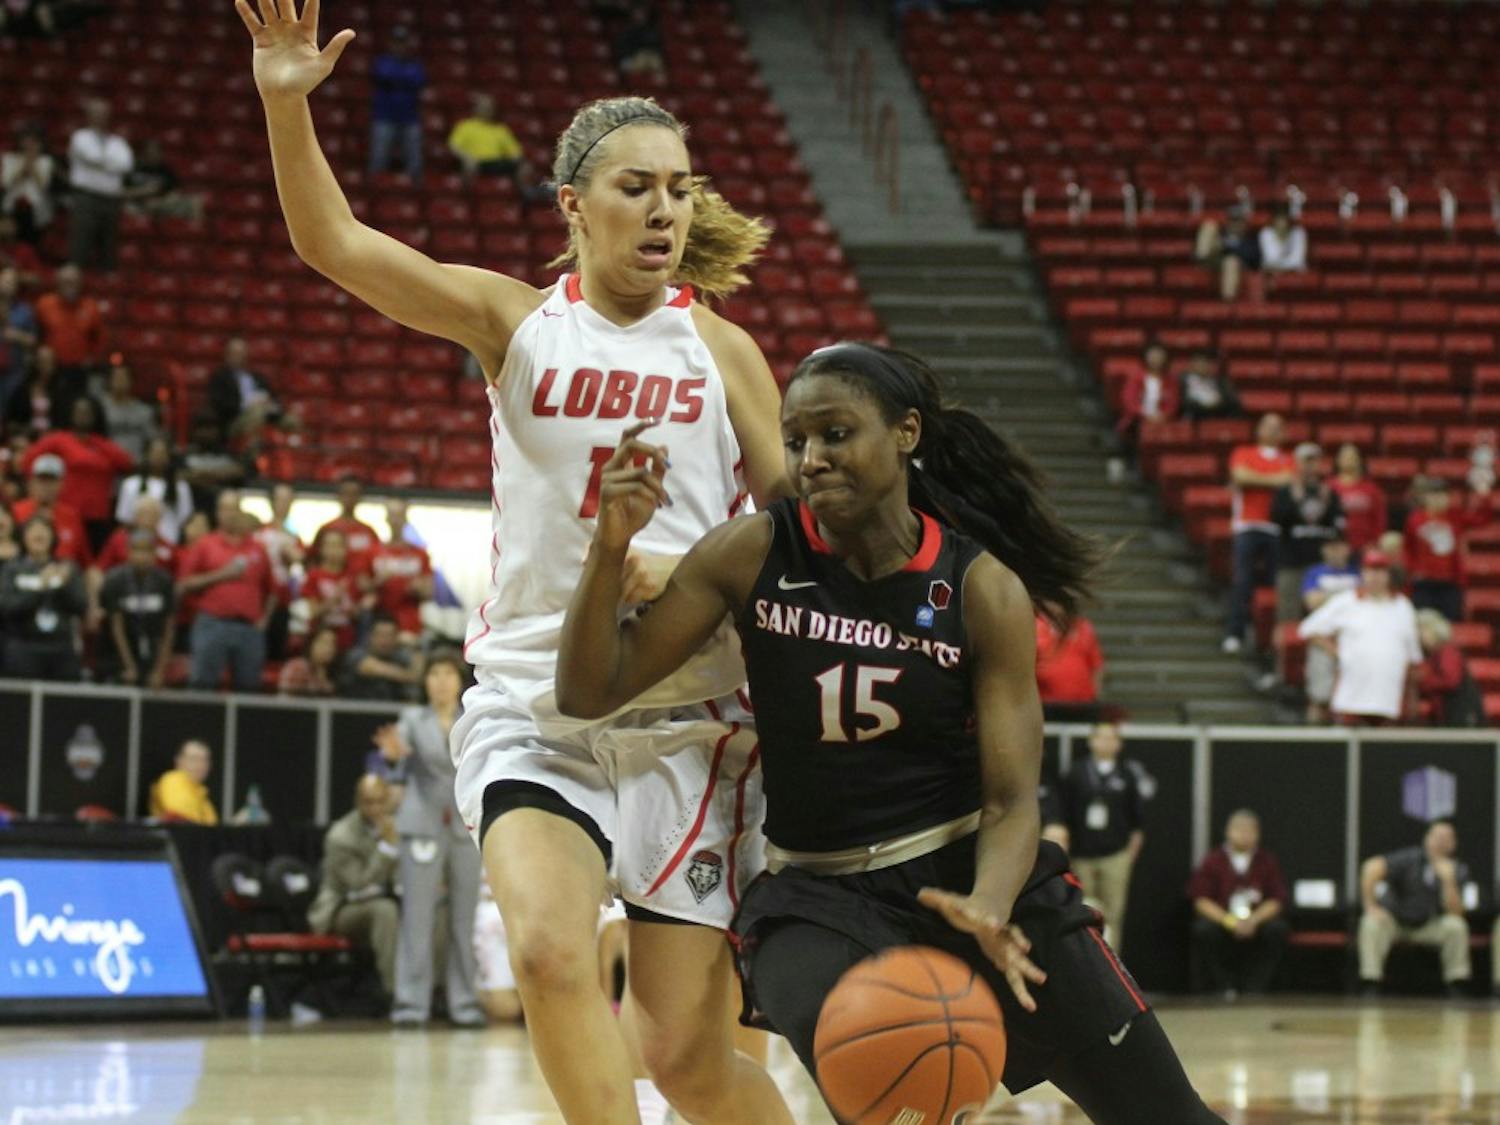 UNM's Alexa Chavez guards San Diego State's McKynzie Fort during the second half of the Mountain West Basketball Tournament quarterfinal game Tuesday evening at the Thomas &amp; Mack Center in Las Vegas. The Lobos held off the Aztec to advance to Wednesday's semifinals.